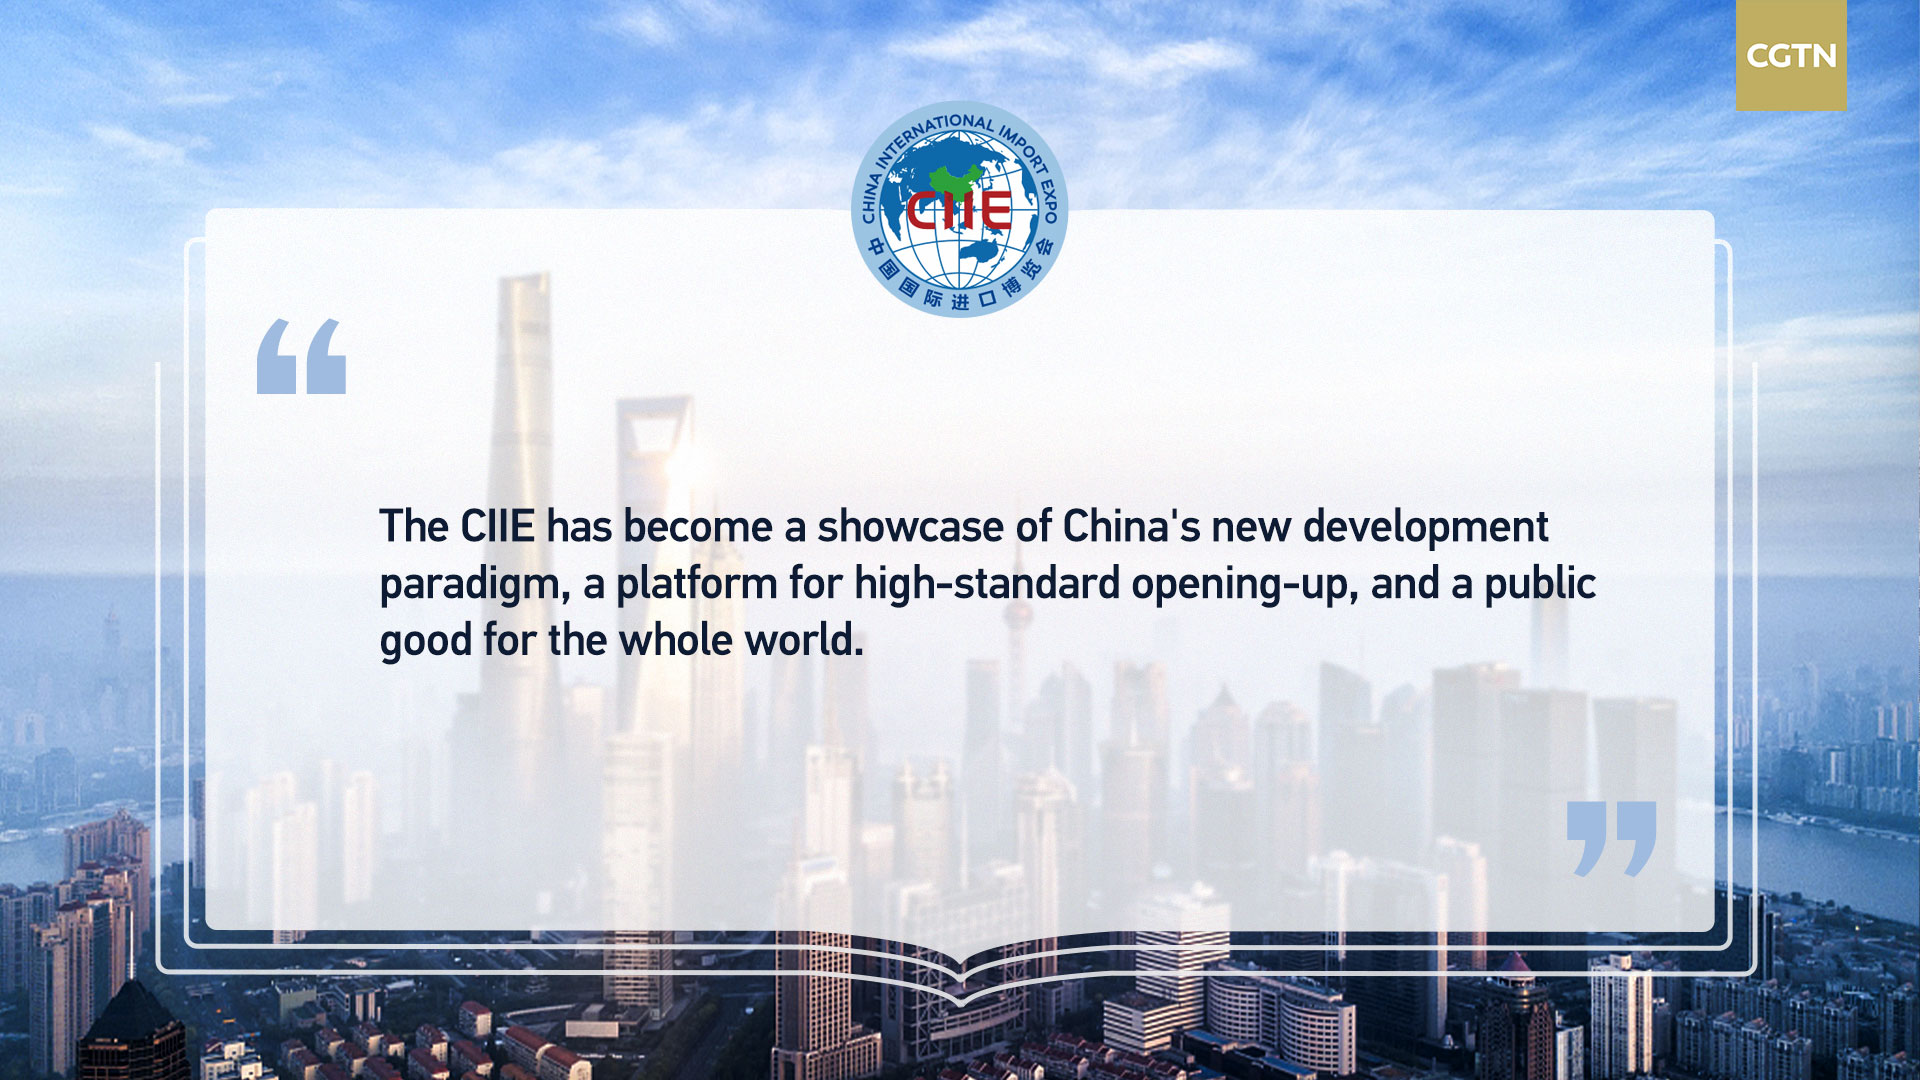 Key quotes from Xi Jinping's speech at 5th CIIE opening ceremony